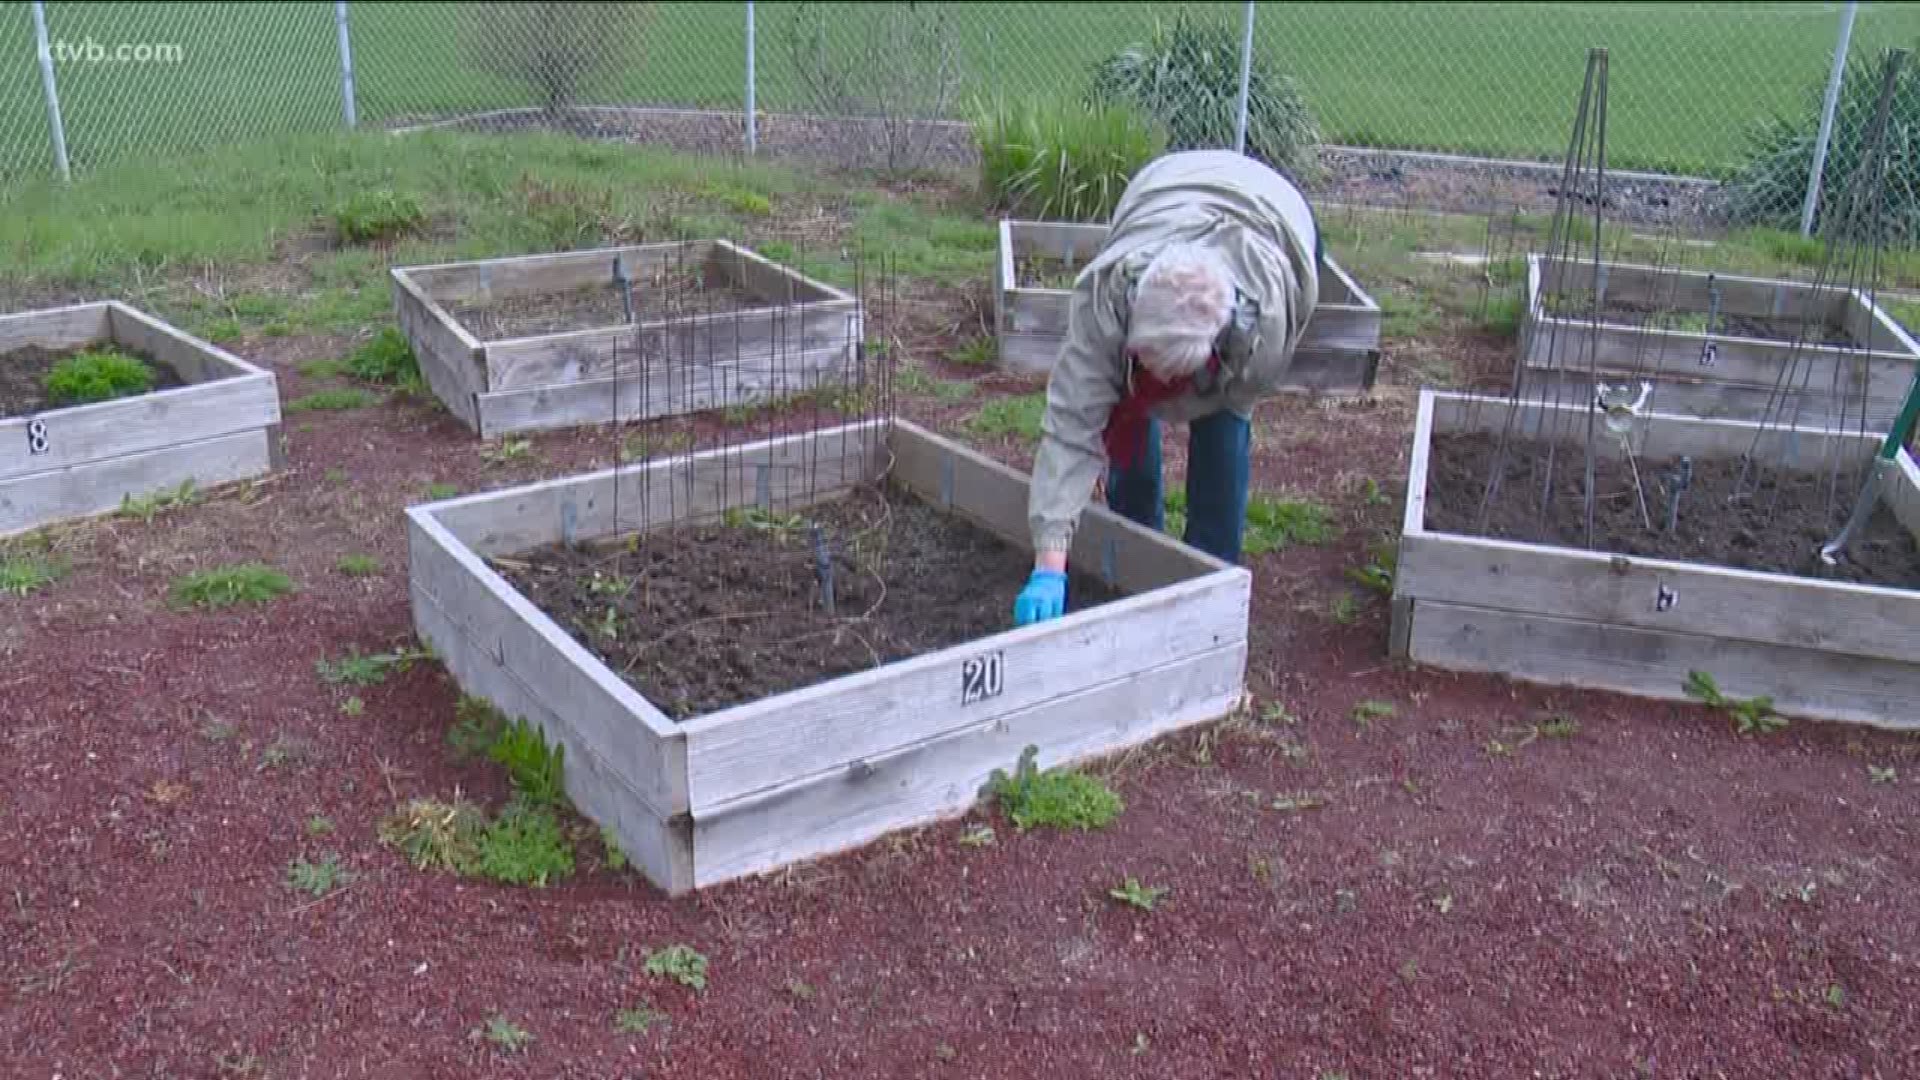 A parent of two former students is leading the effort to save the garden.